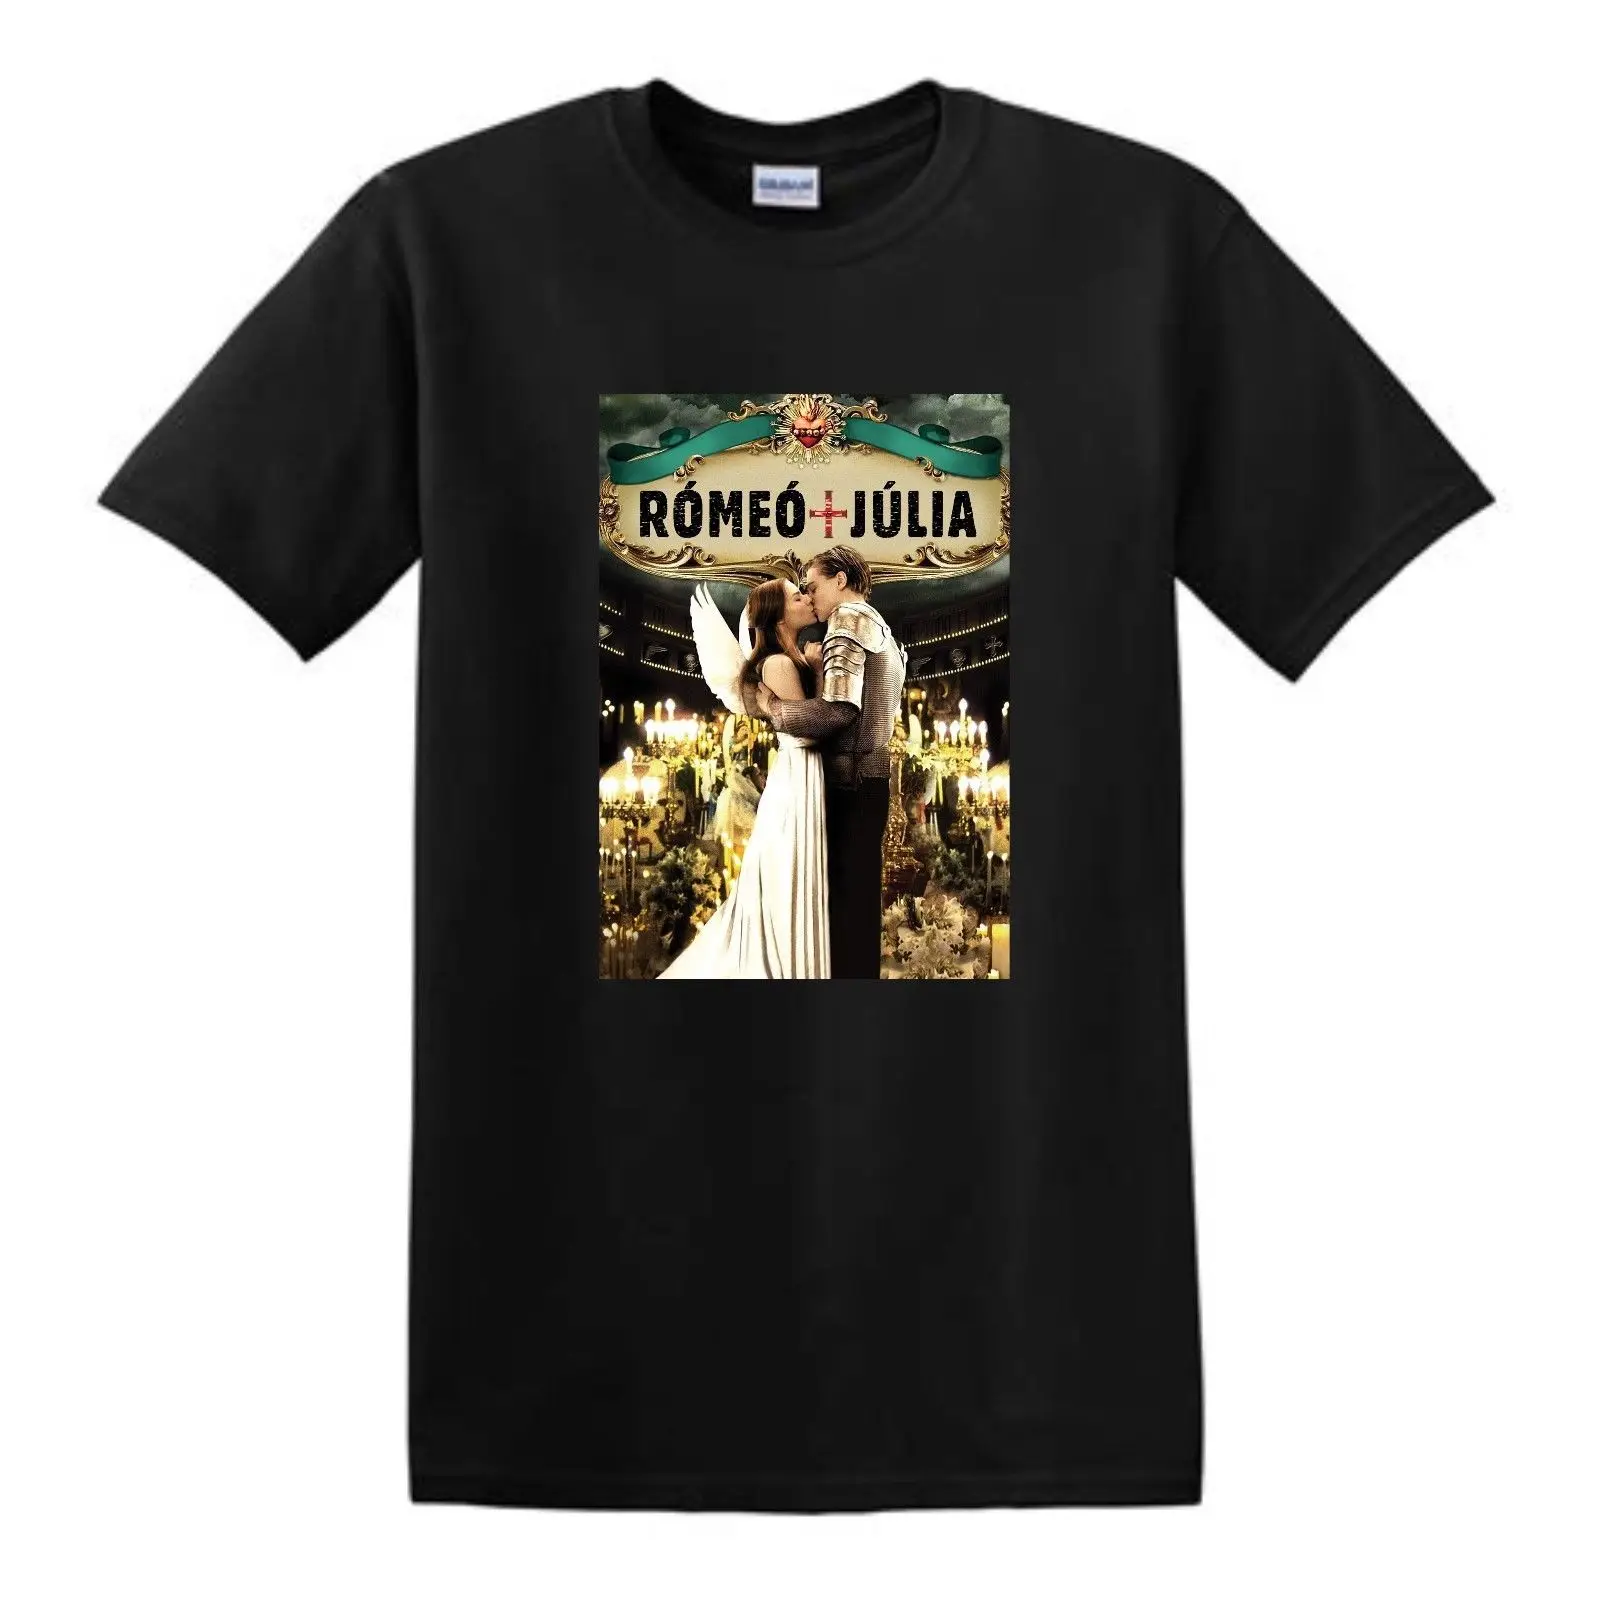 

Romeo & Juliet T-shirt,movie 1996 hollywood,free delivery 100% Cotton Short Sleeve O-Neck Tops Tee Shirts 2018 New Mens T Shirts